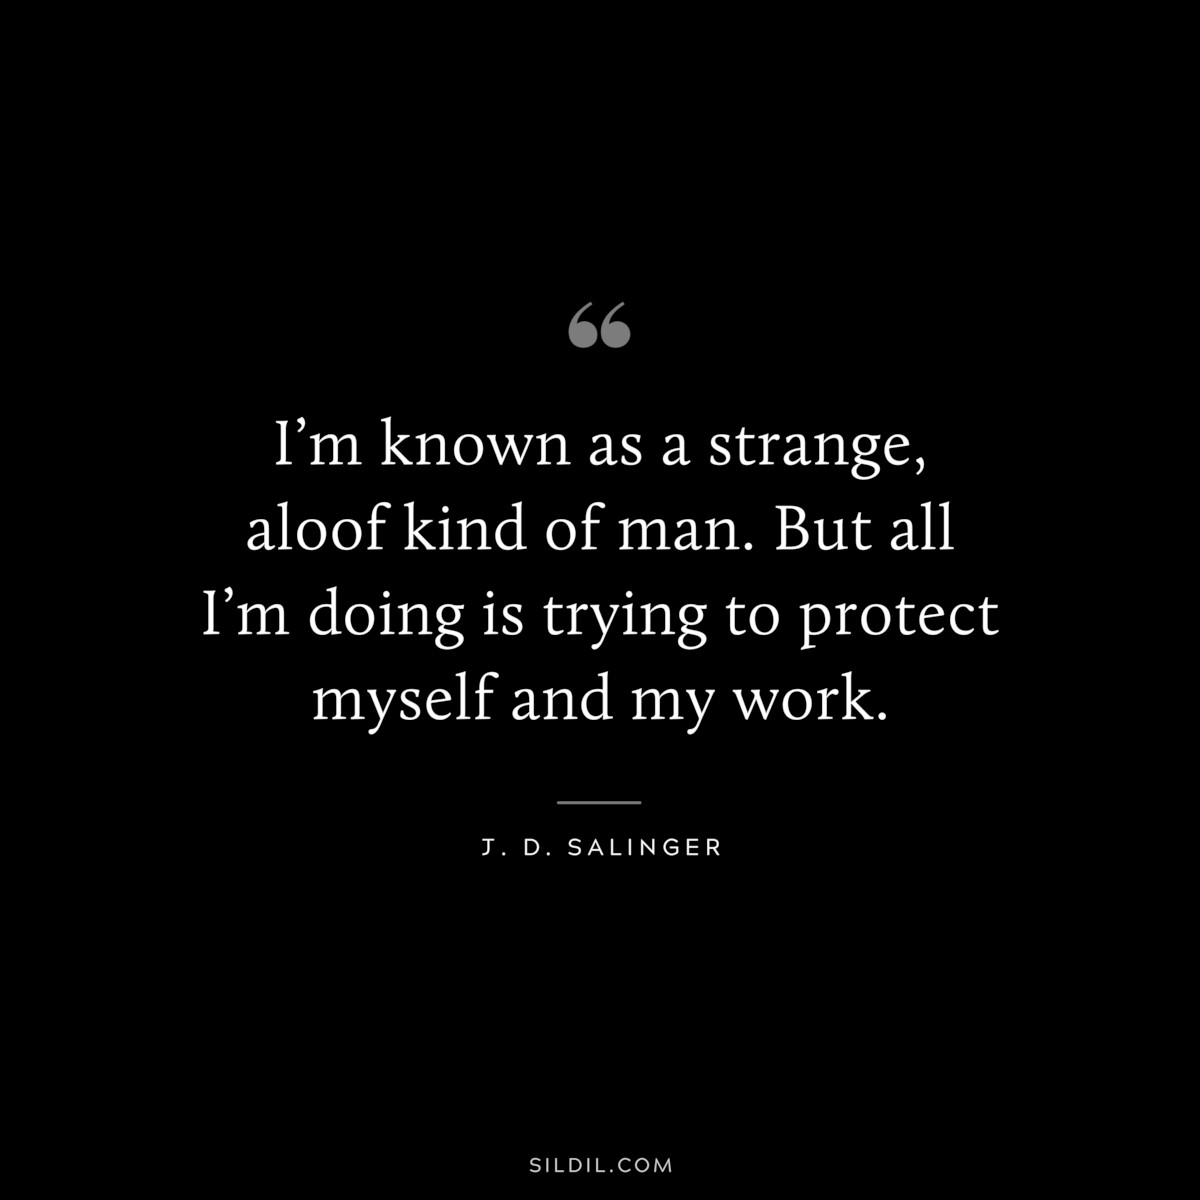 I’m known as a strange, aloof kind of man. But all I’m doing is trying to protect myself and my work. — J. D. Salinger